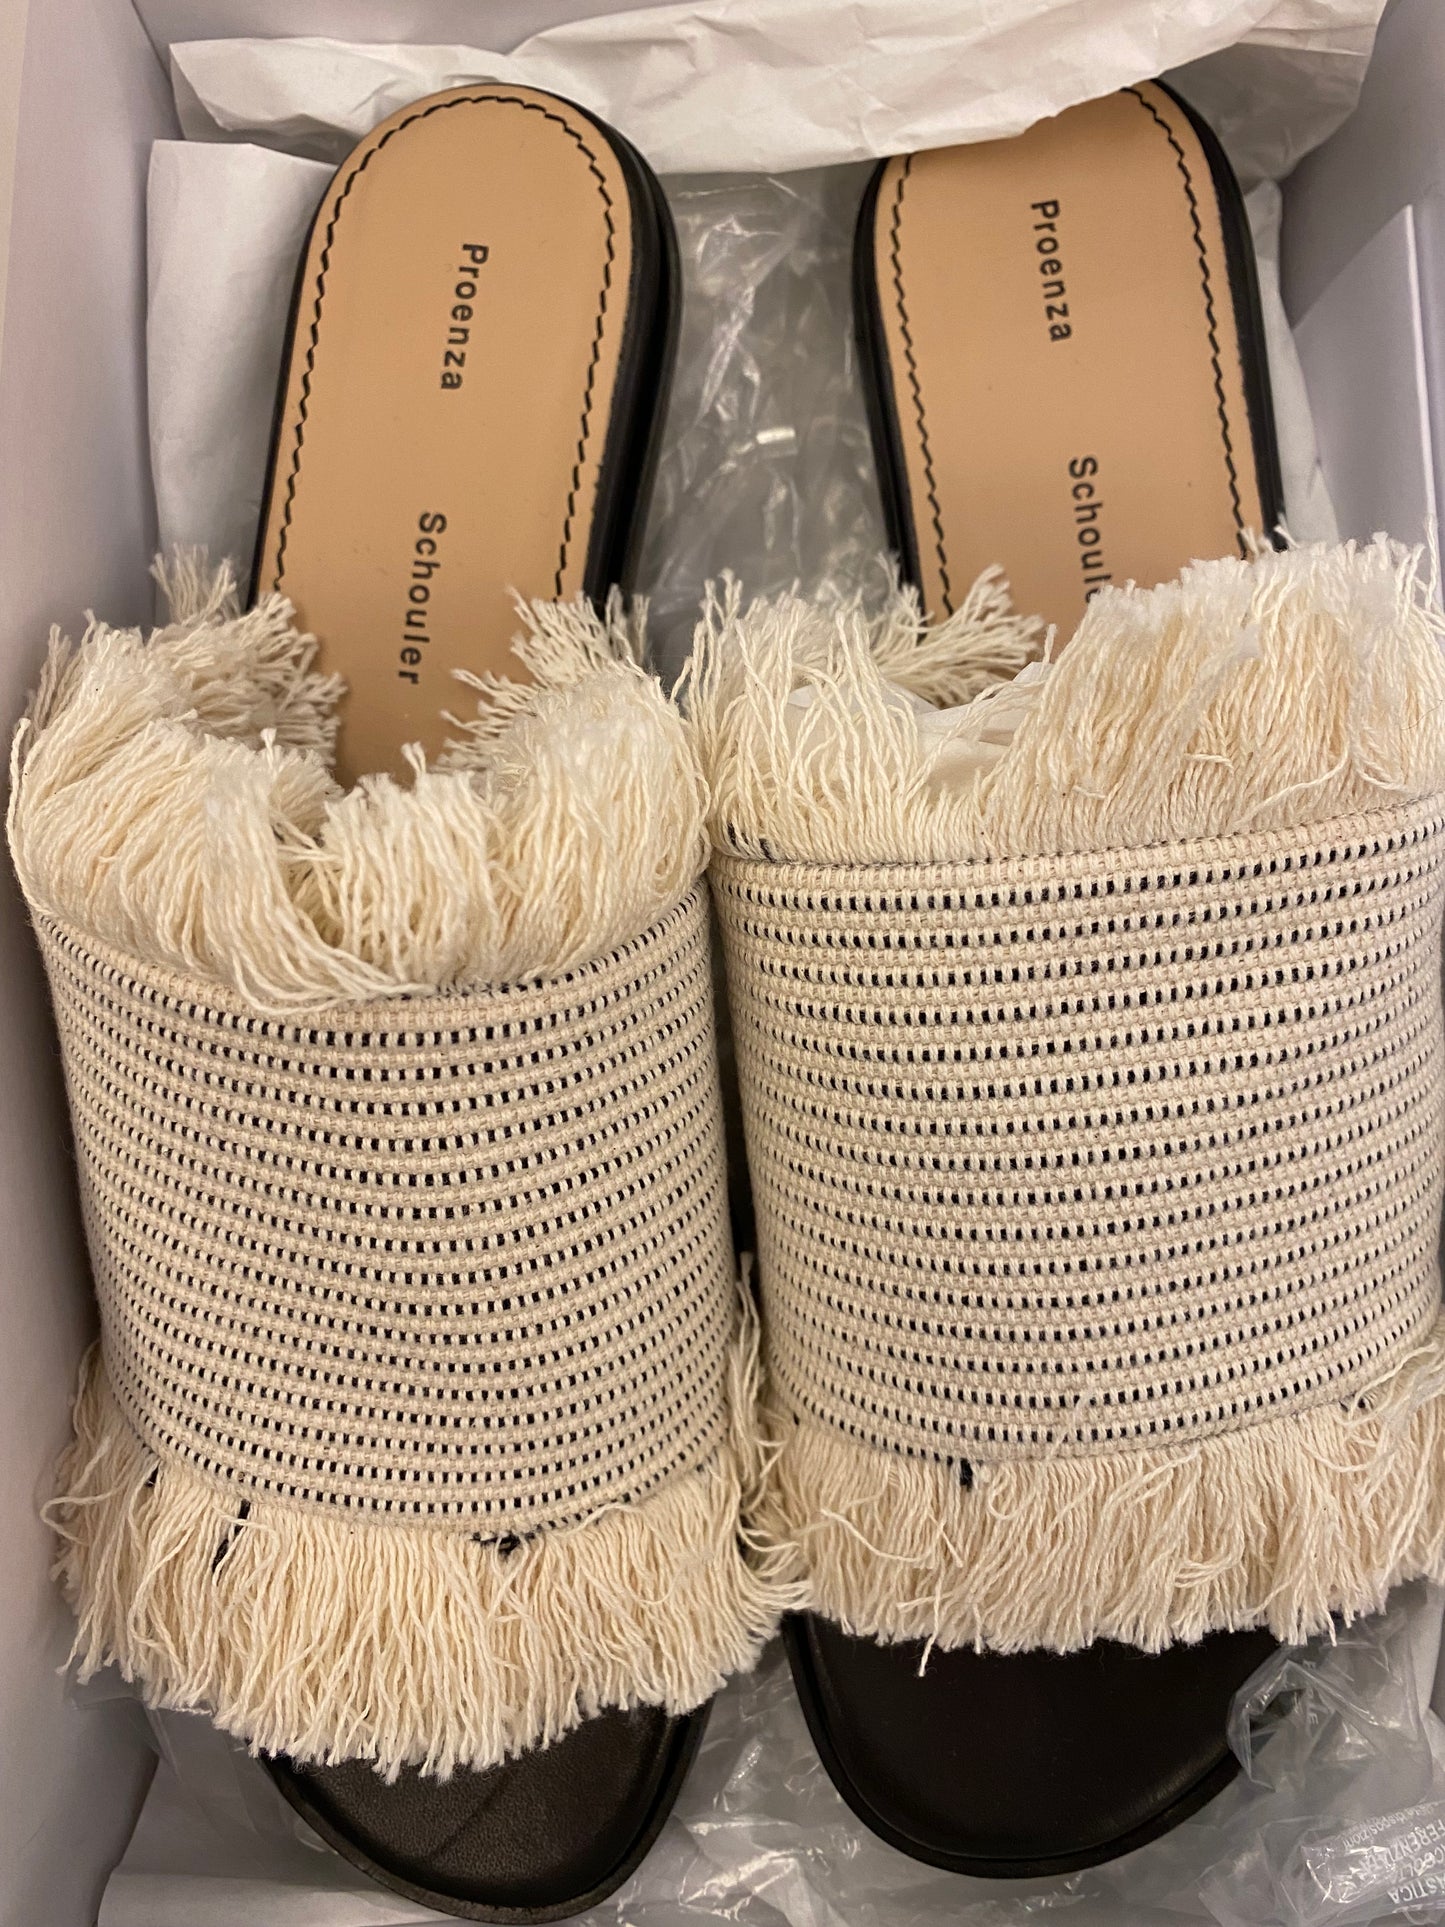 PROENZA SCHOULER Fringed Canvas Sliders Size 40